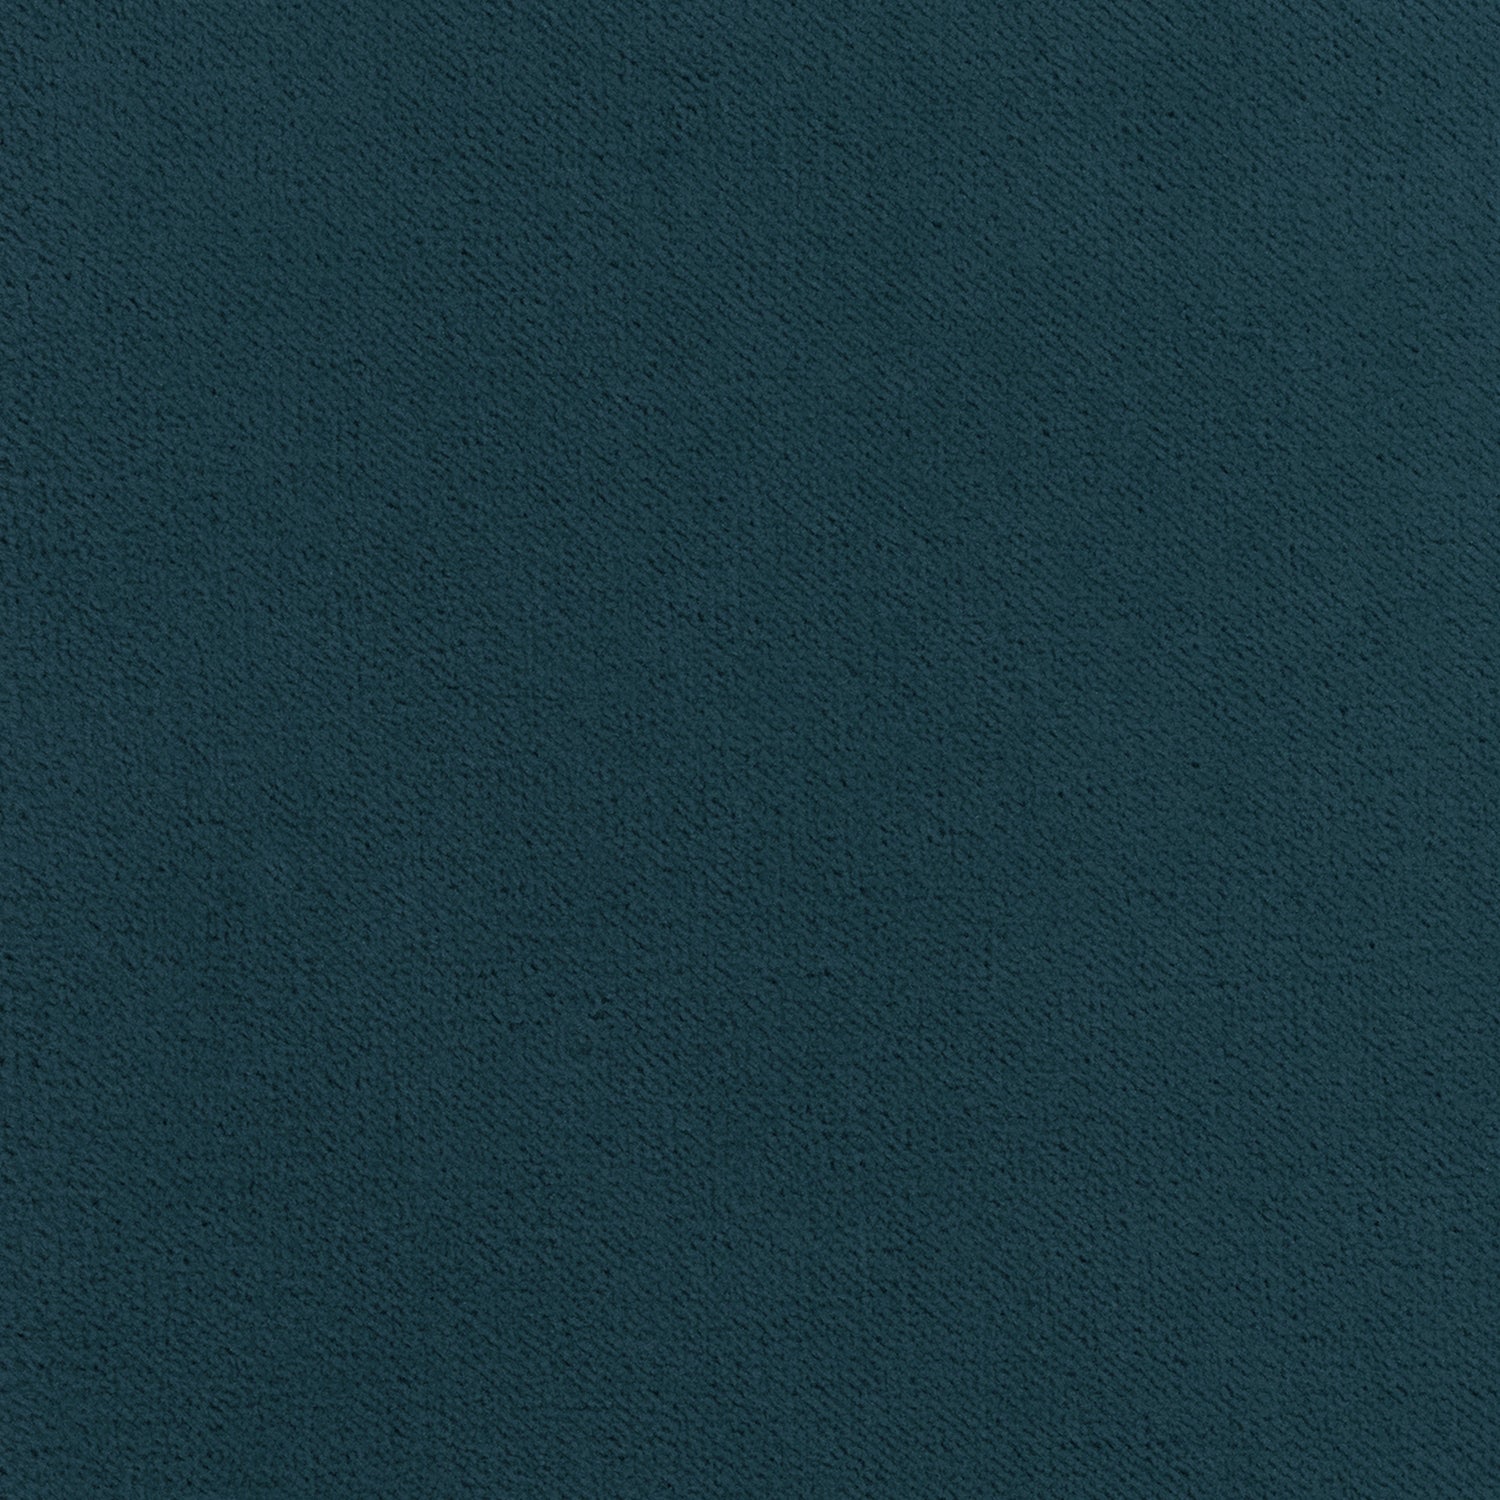 Club Velvet fabric in marine color - pattern number W7238 - by Thibaut in the Club Velvet collection